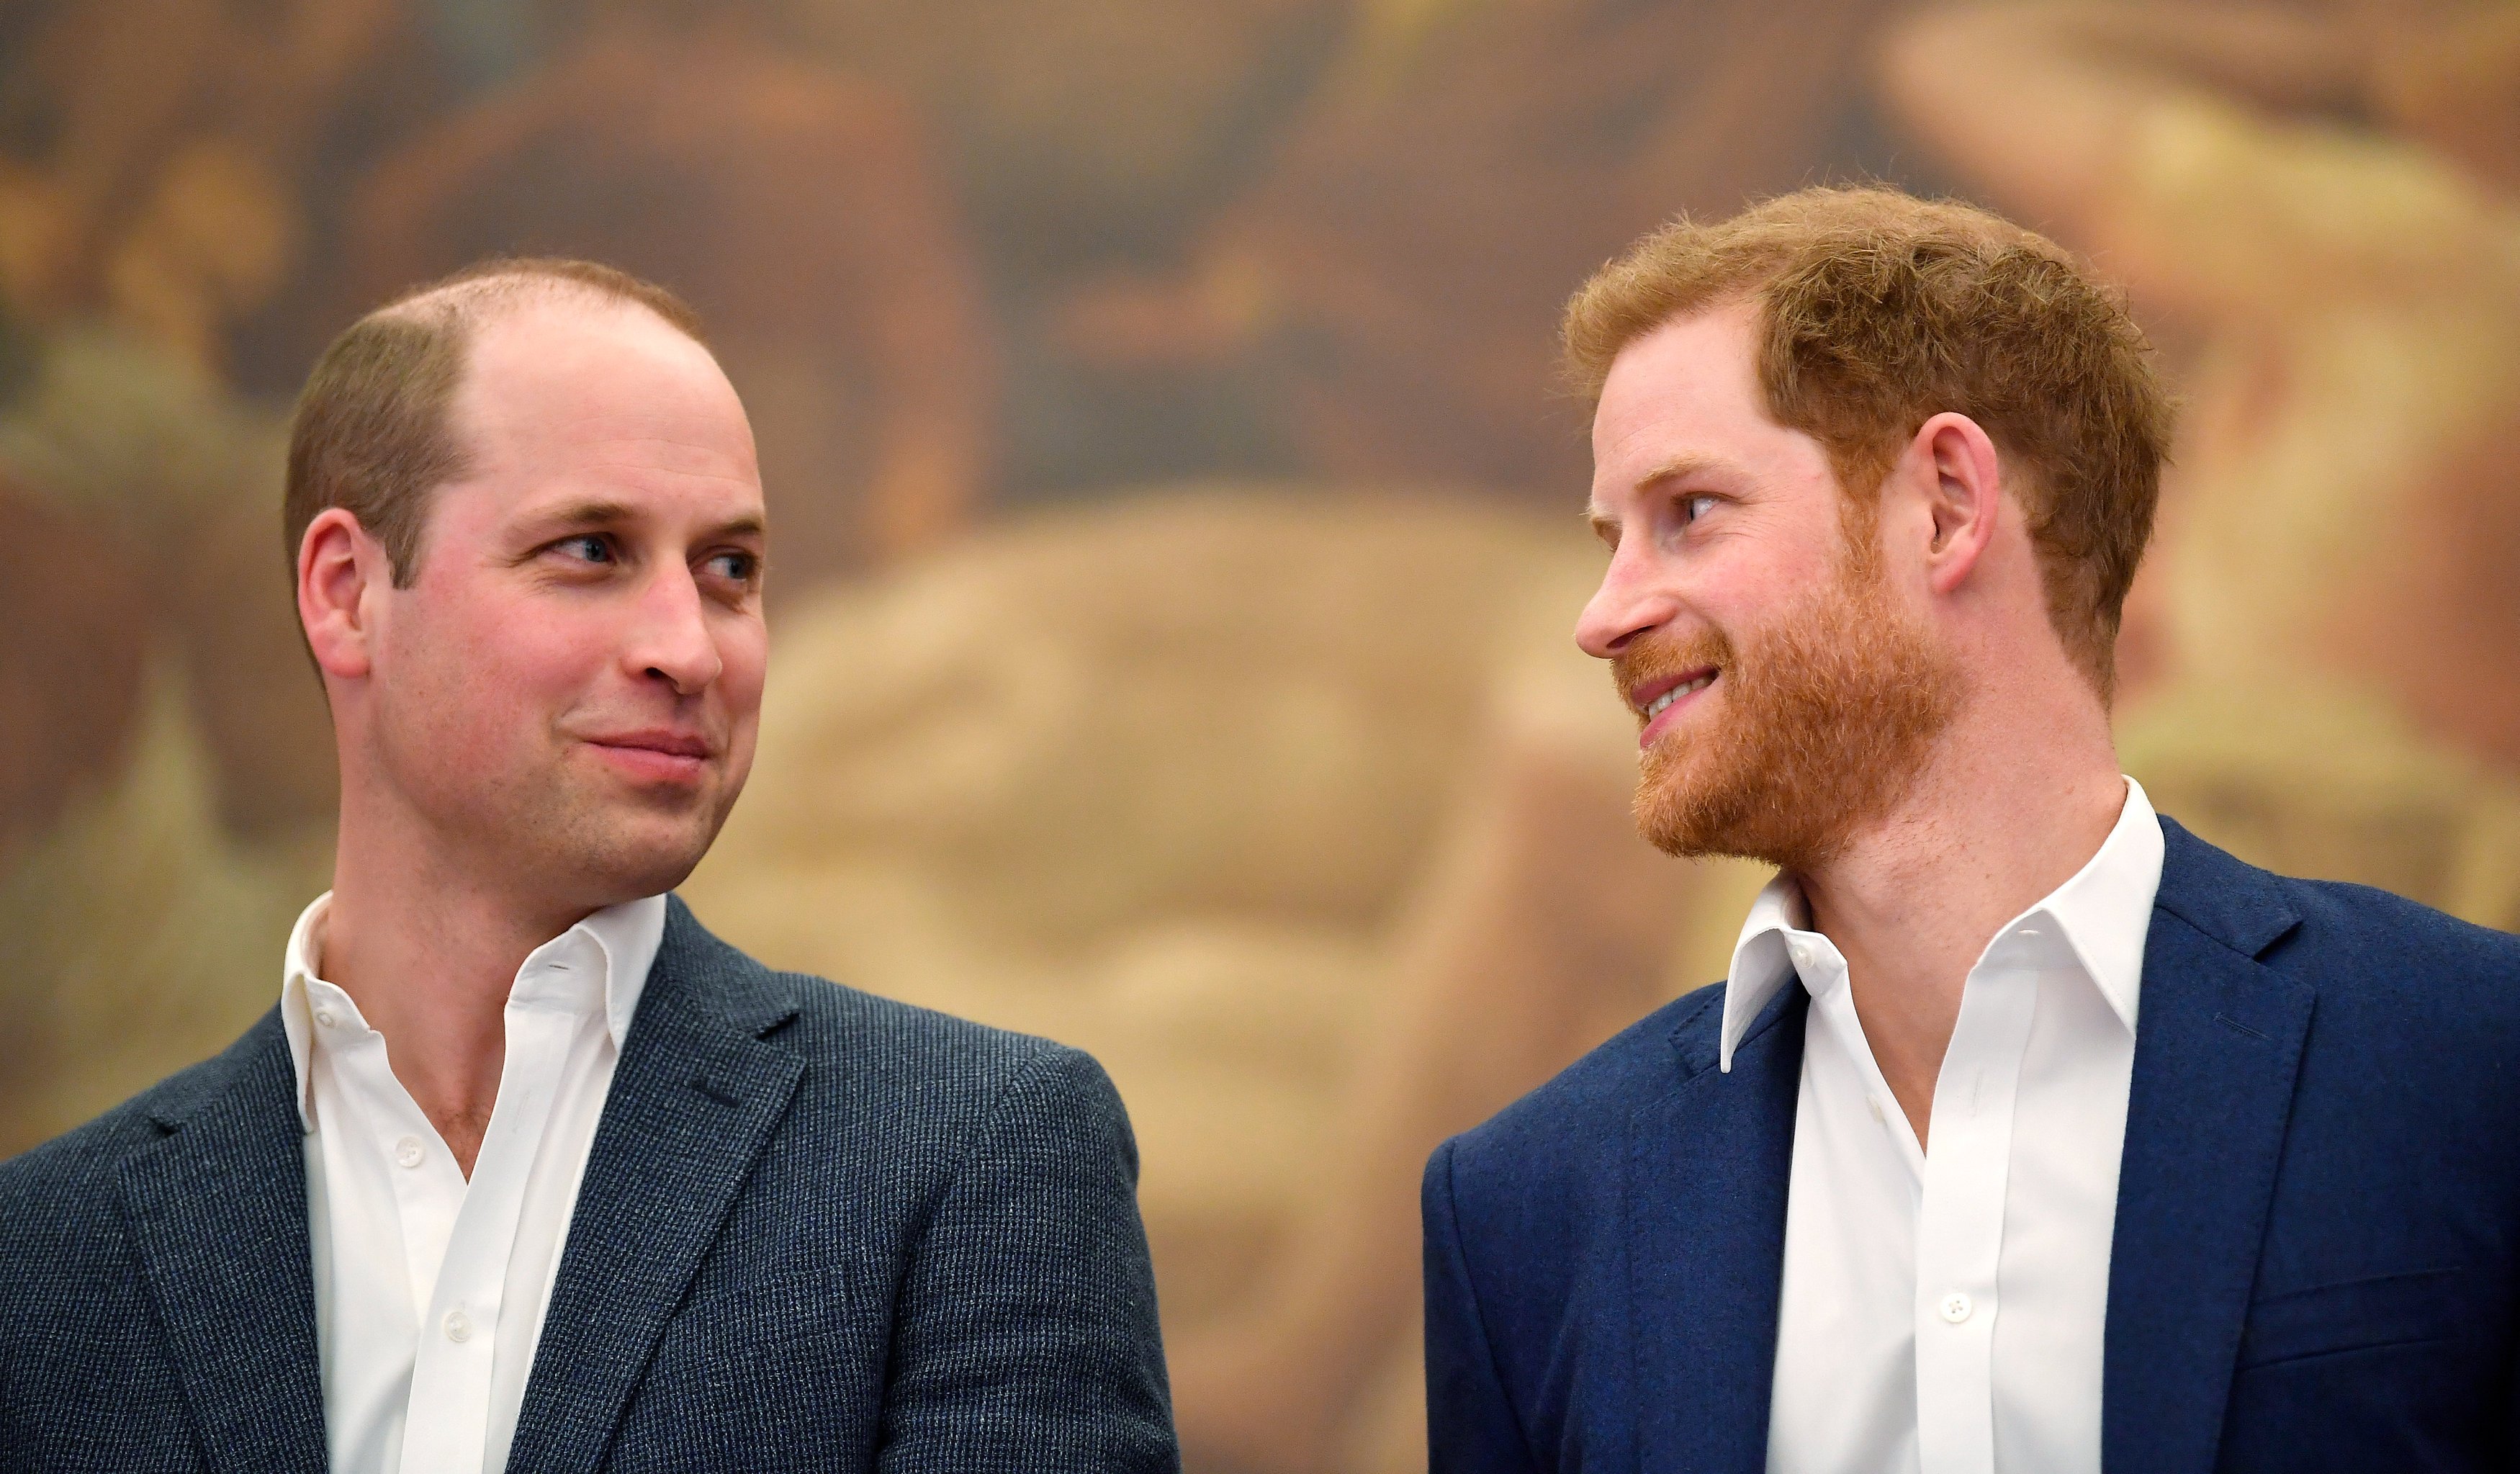 Prince Harry Uses a Gesture That Suggests He Feels ‘Superior’ to Prince William Says Body Language Expert